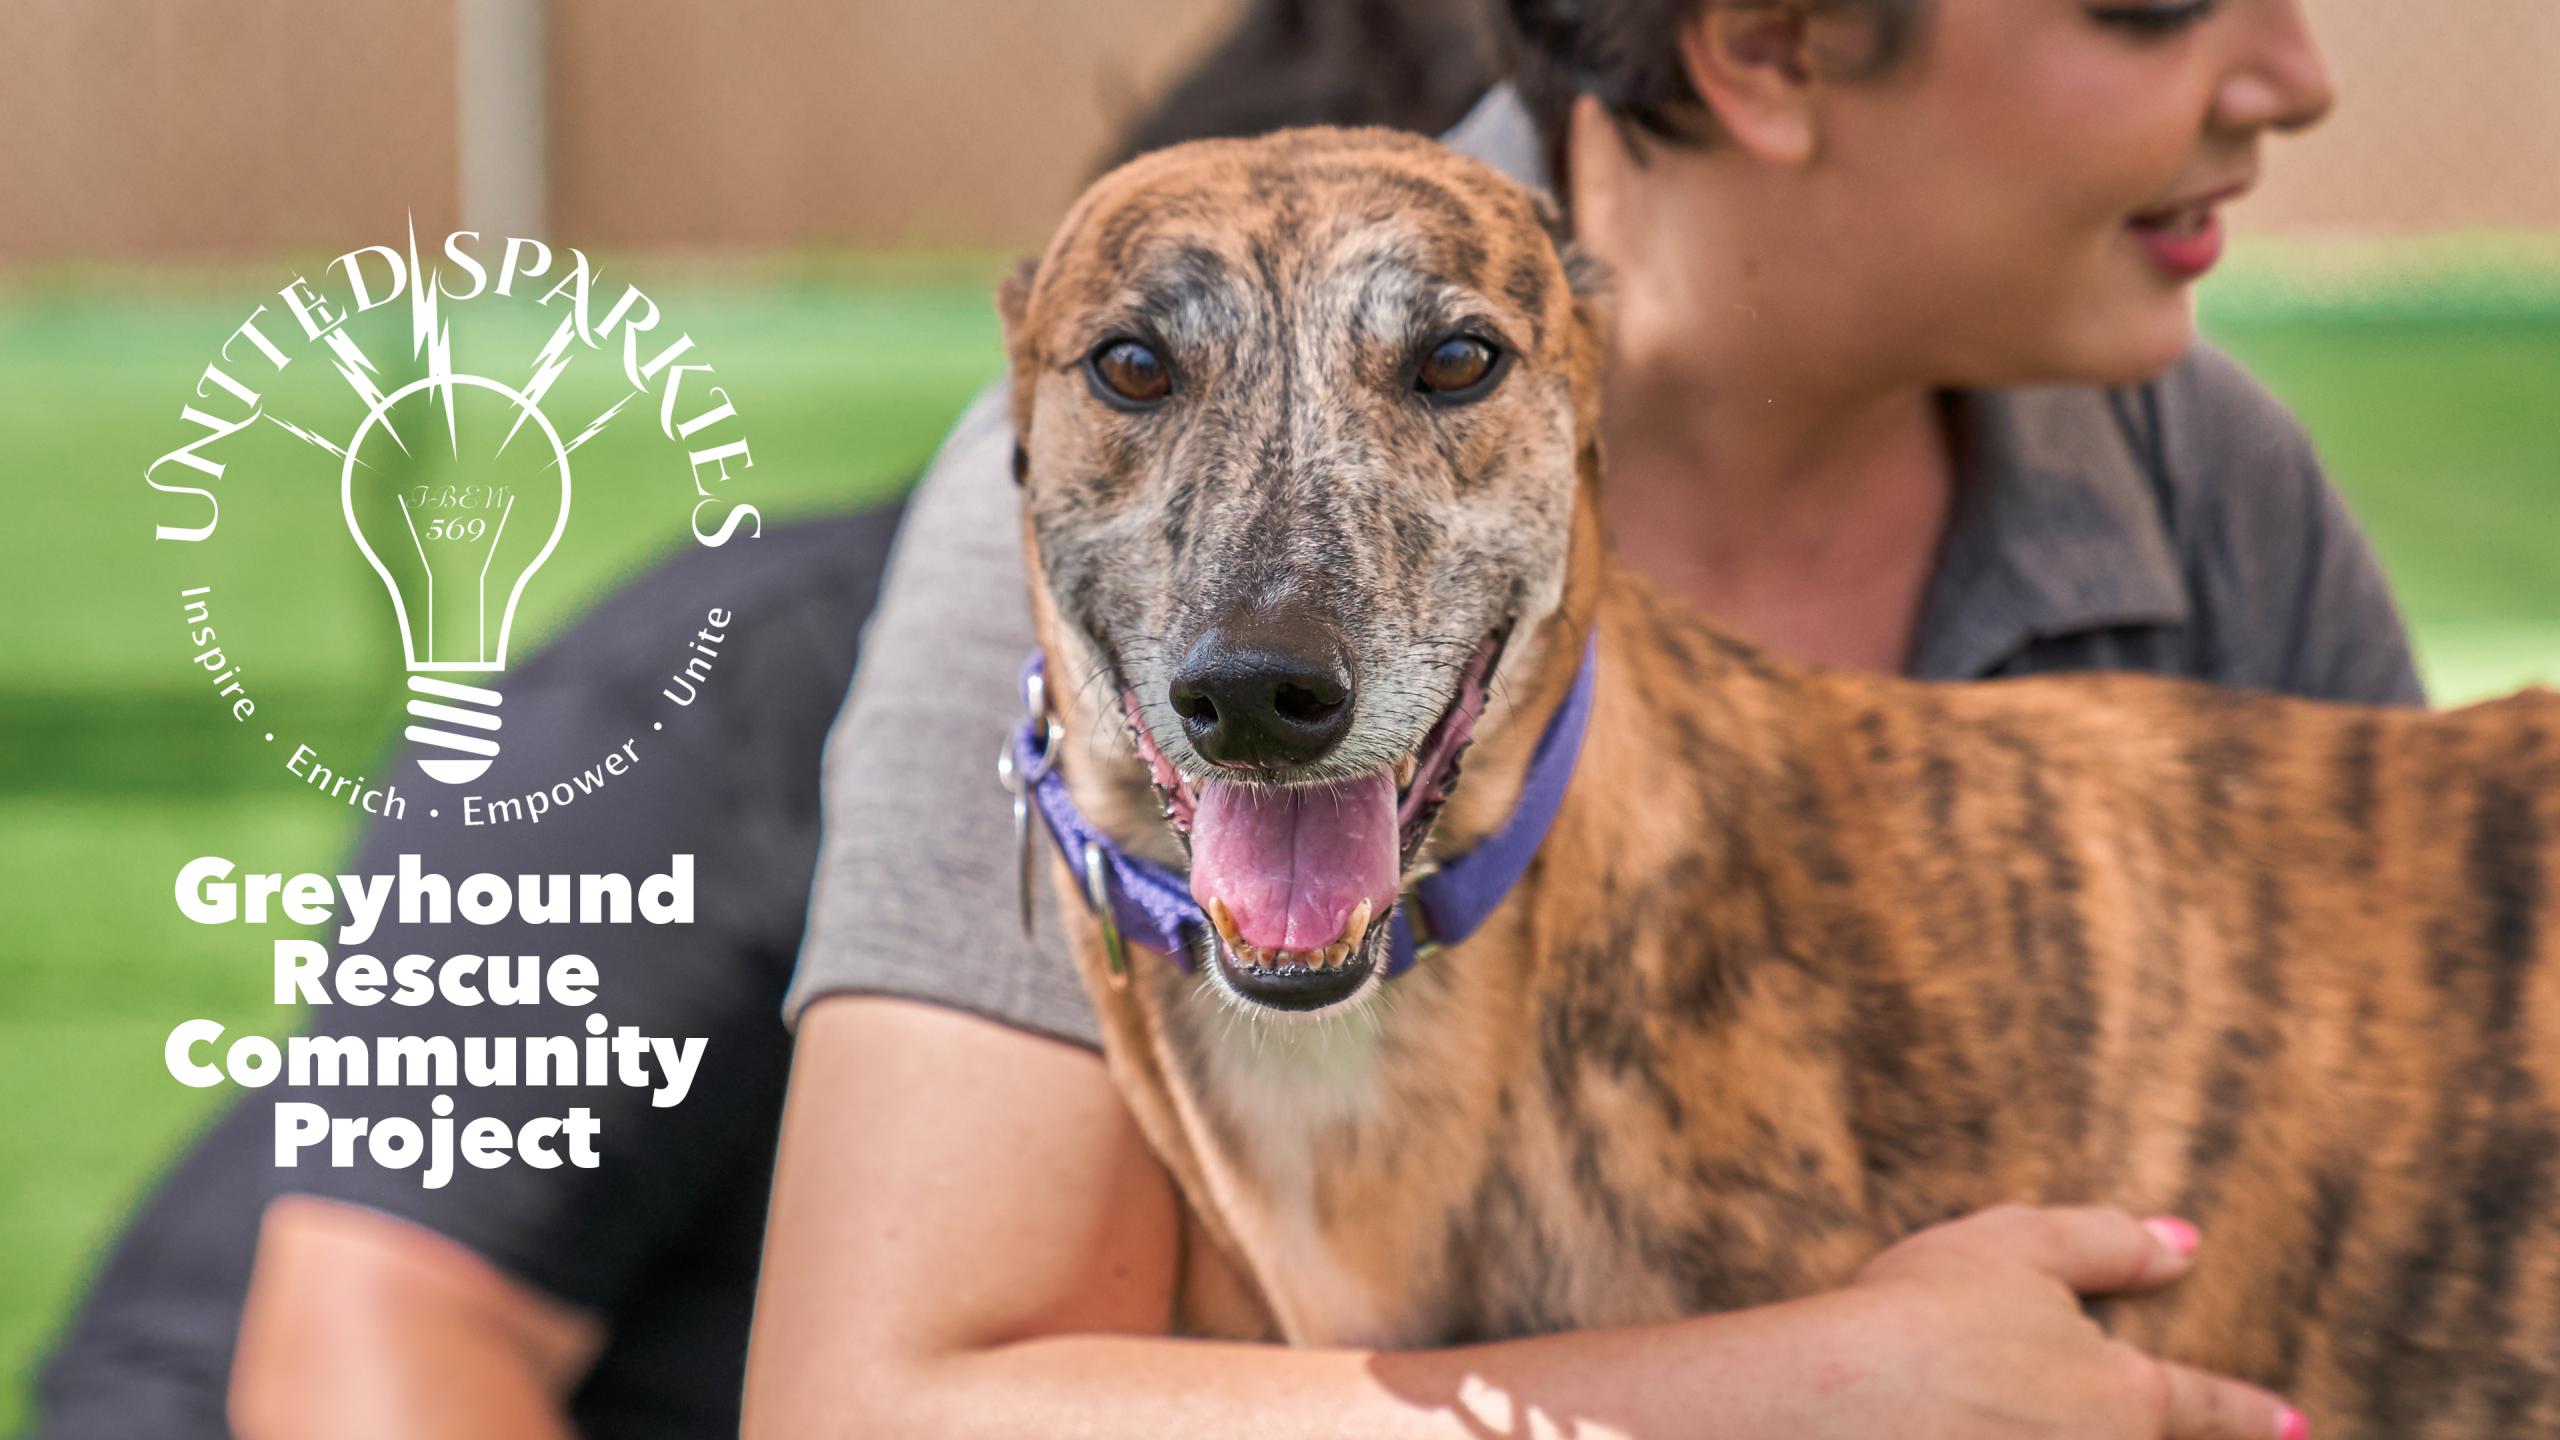 United Sparkies Greyhound Rescue Project